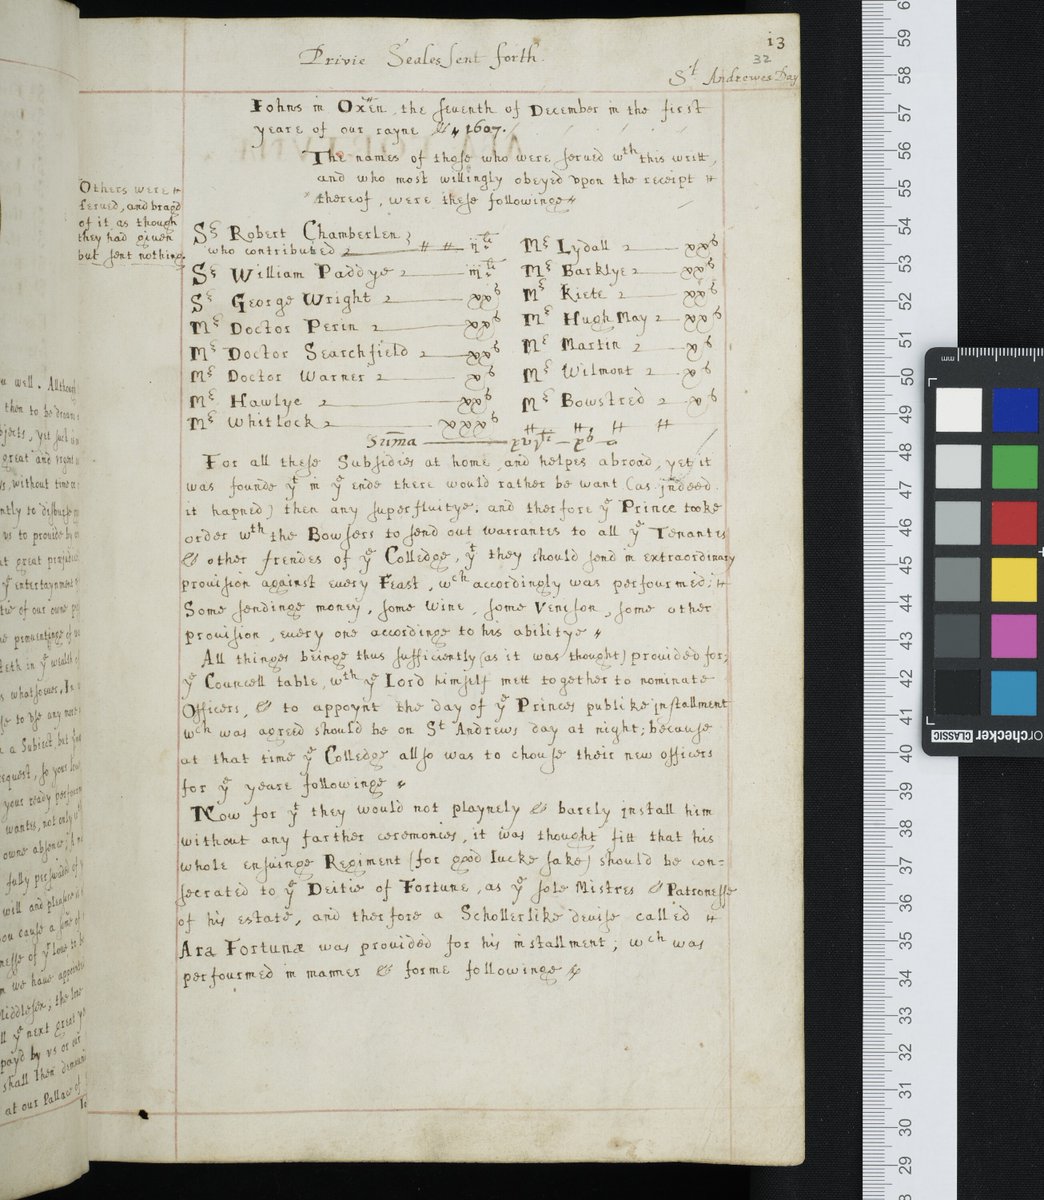 MS 52 is now available online. This MS consists of 2 works - a Latin verse life of the college's founder Thomas White, and an account of celebrations that took place at the college from 1607-1608. (Pictured: Fols. 31v and 32r) You can view in here: digital.bodleian.ox.ac.uk/objects/dcc491…